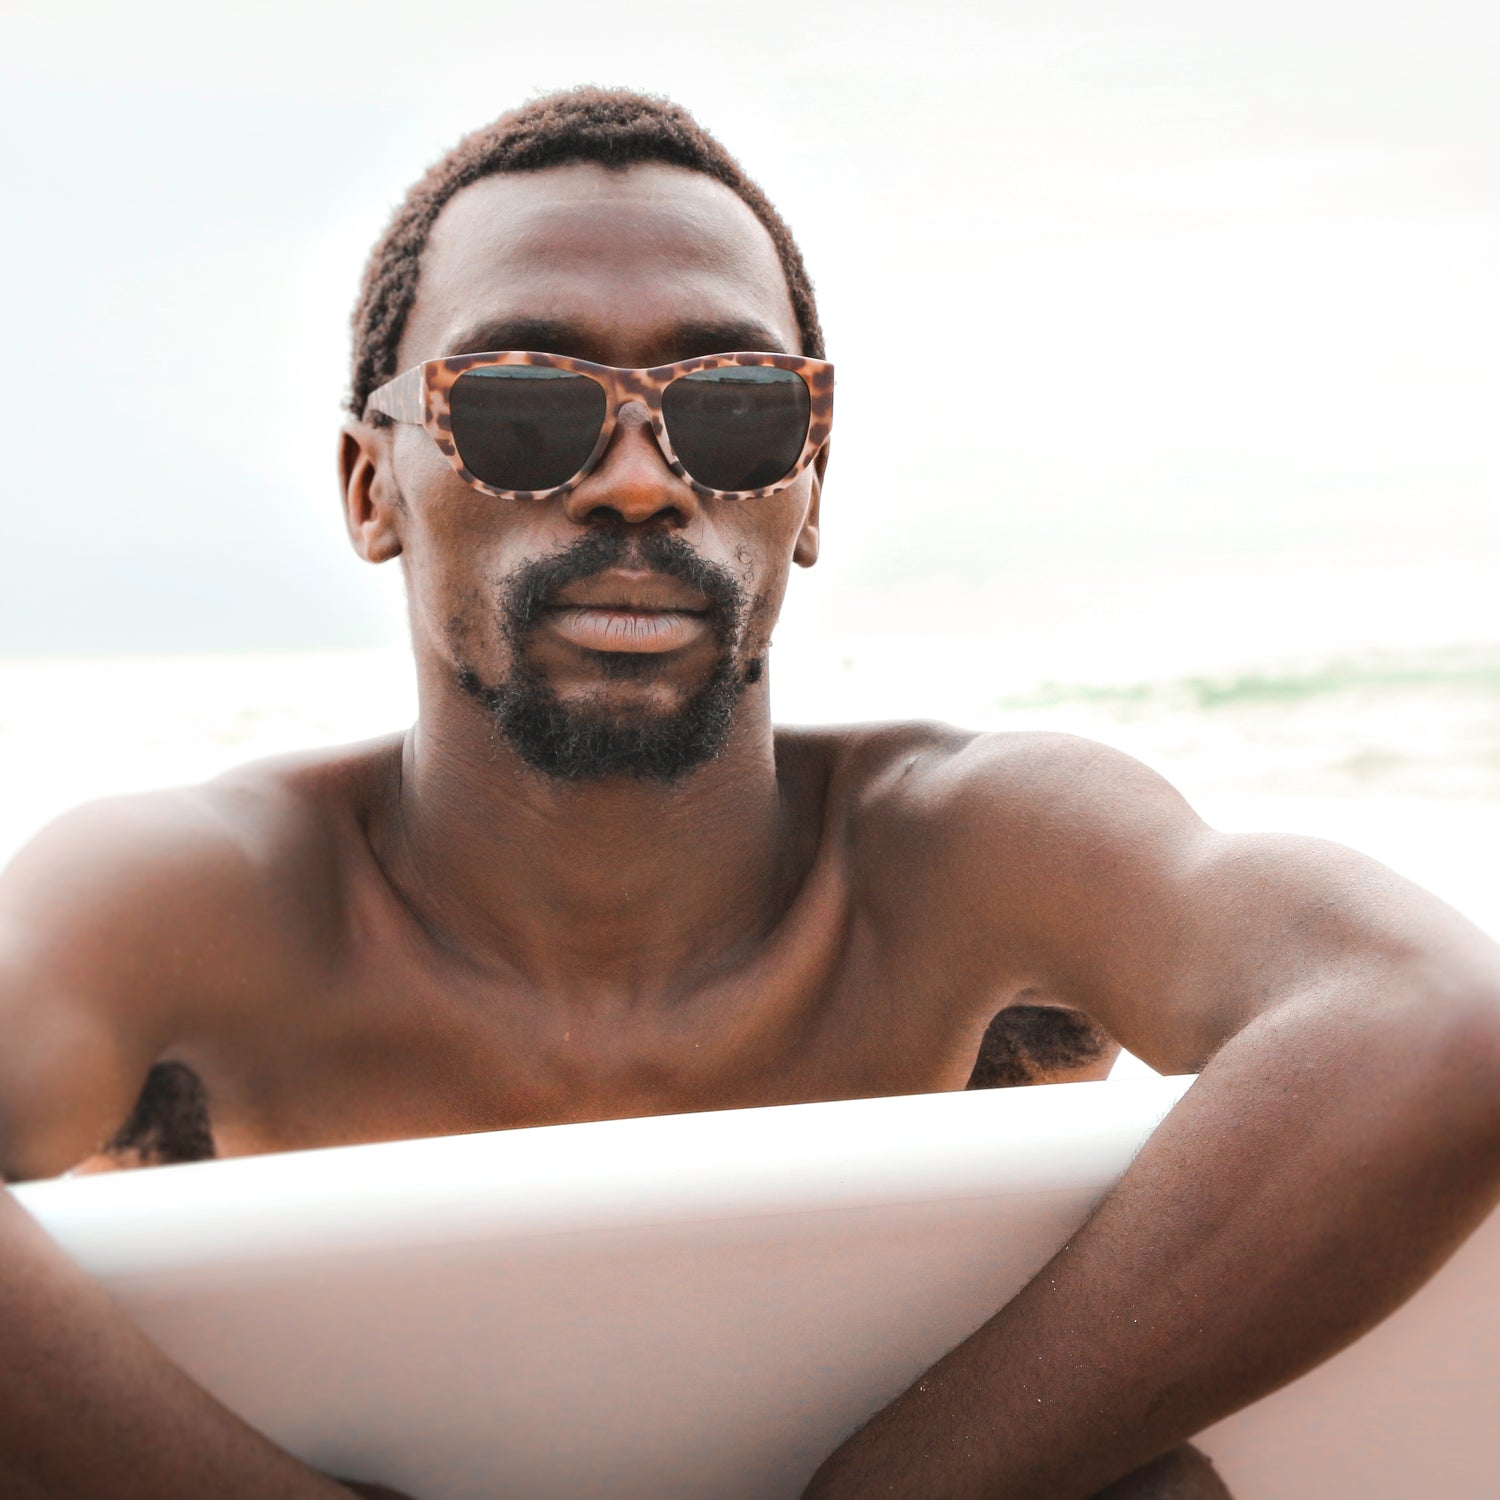 South African professional surfer, Avuyile "Avo" Ndamase, wearing The DiMaggios sunglasses by Ûs the Movement. Photo by Barry Tuck